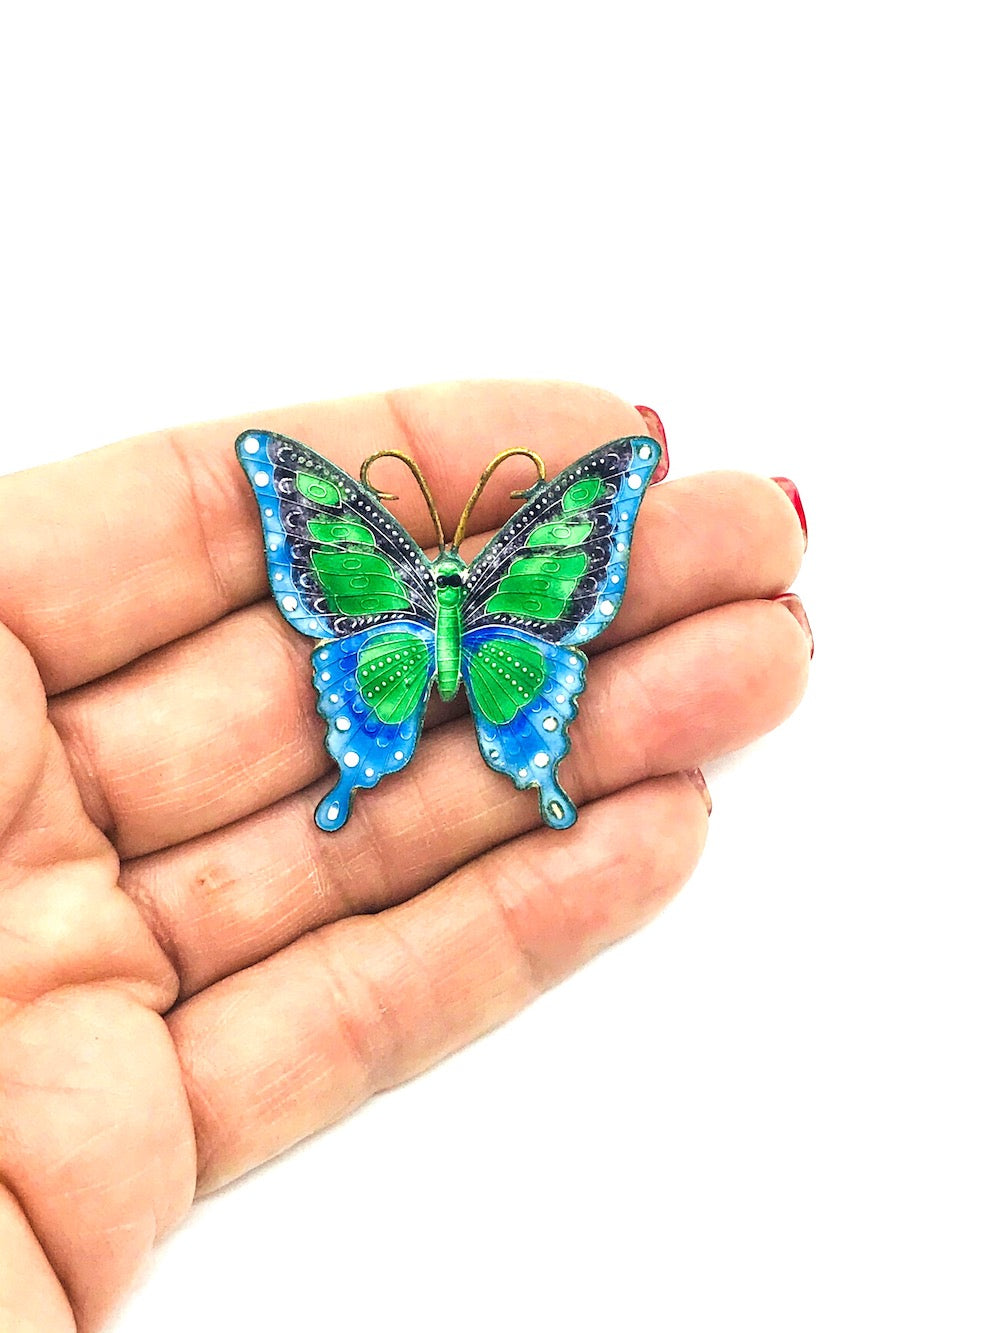 Colorful Enamel Butterfly Pin 1-1/2 Inches Circa 1960's